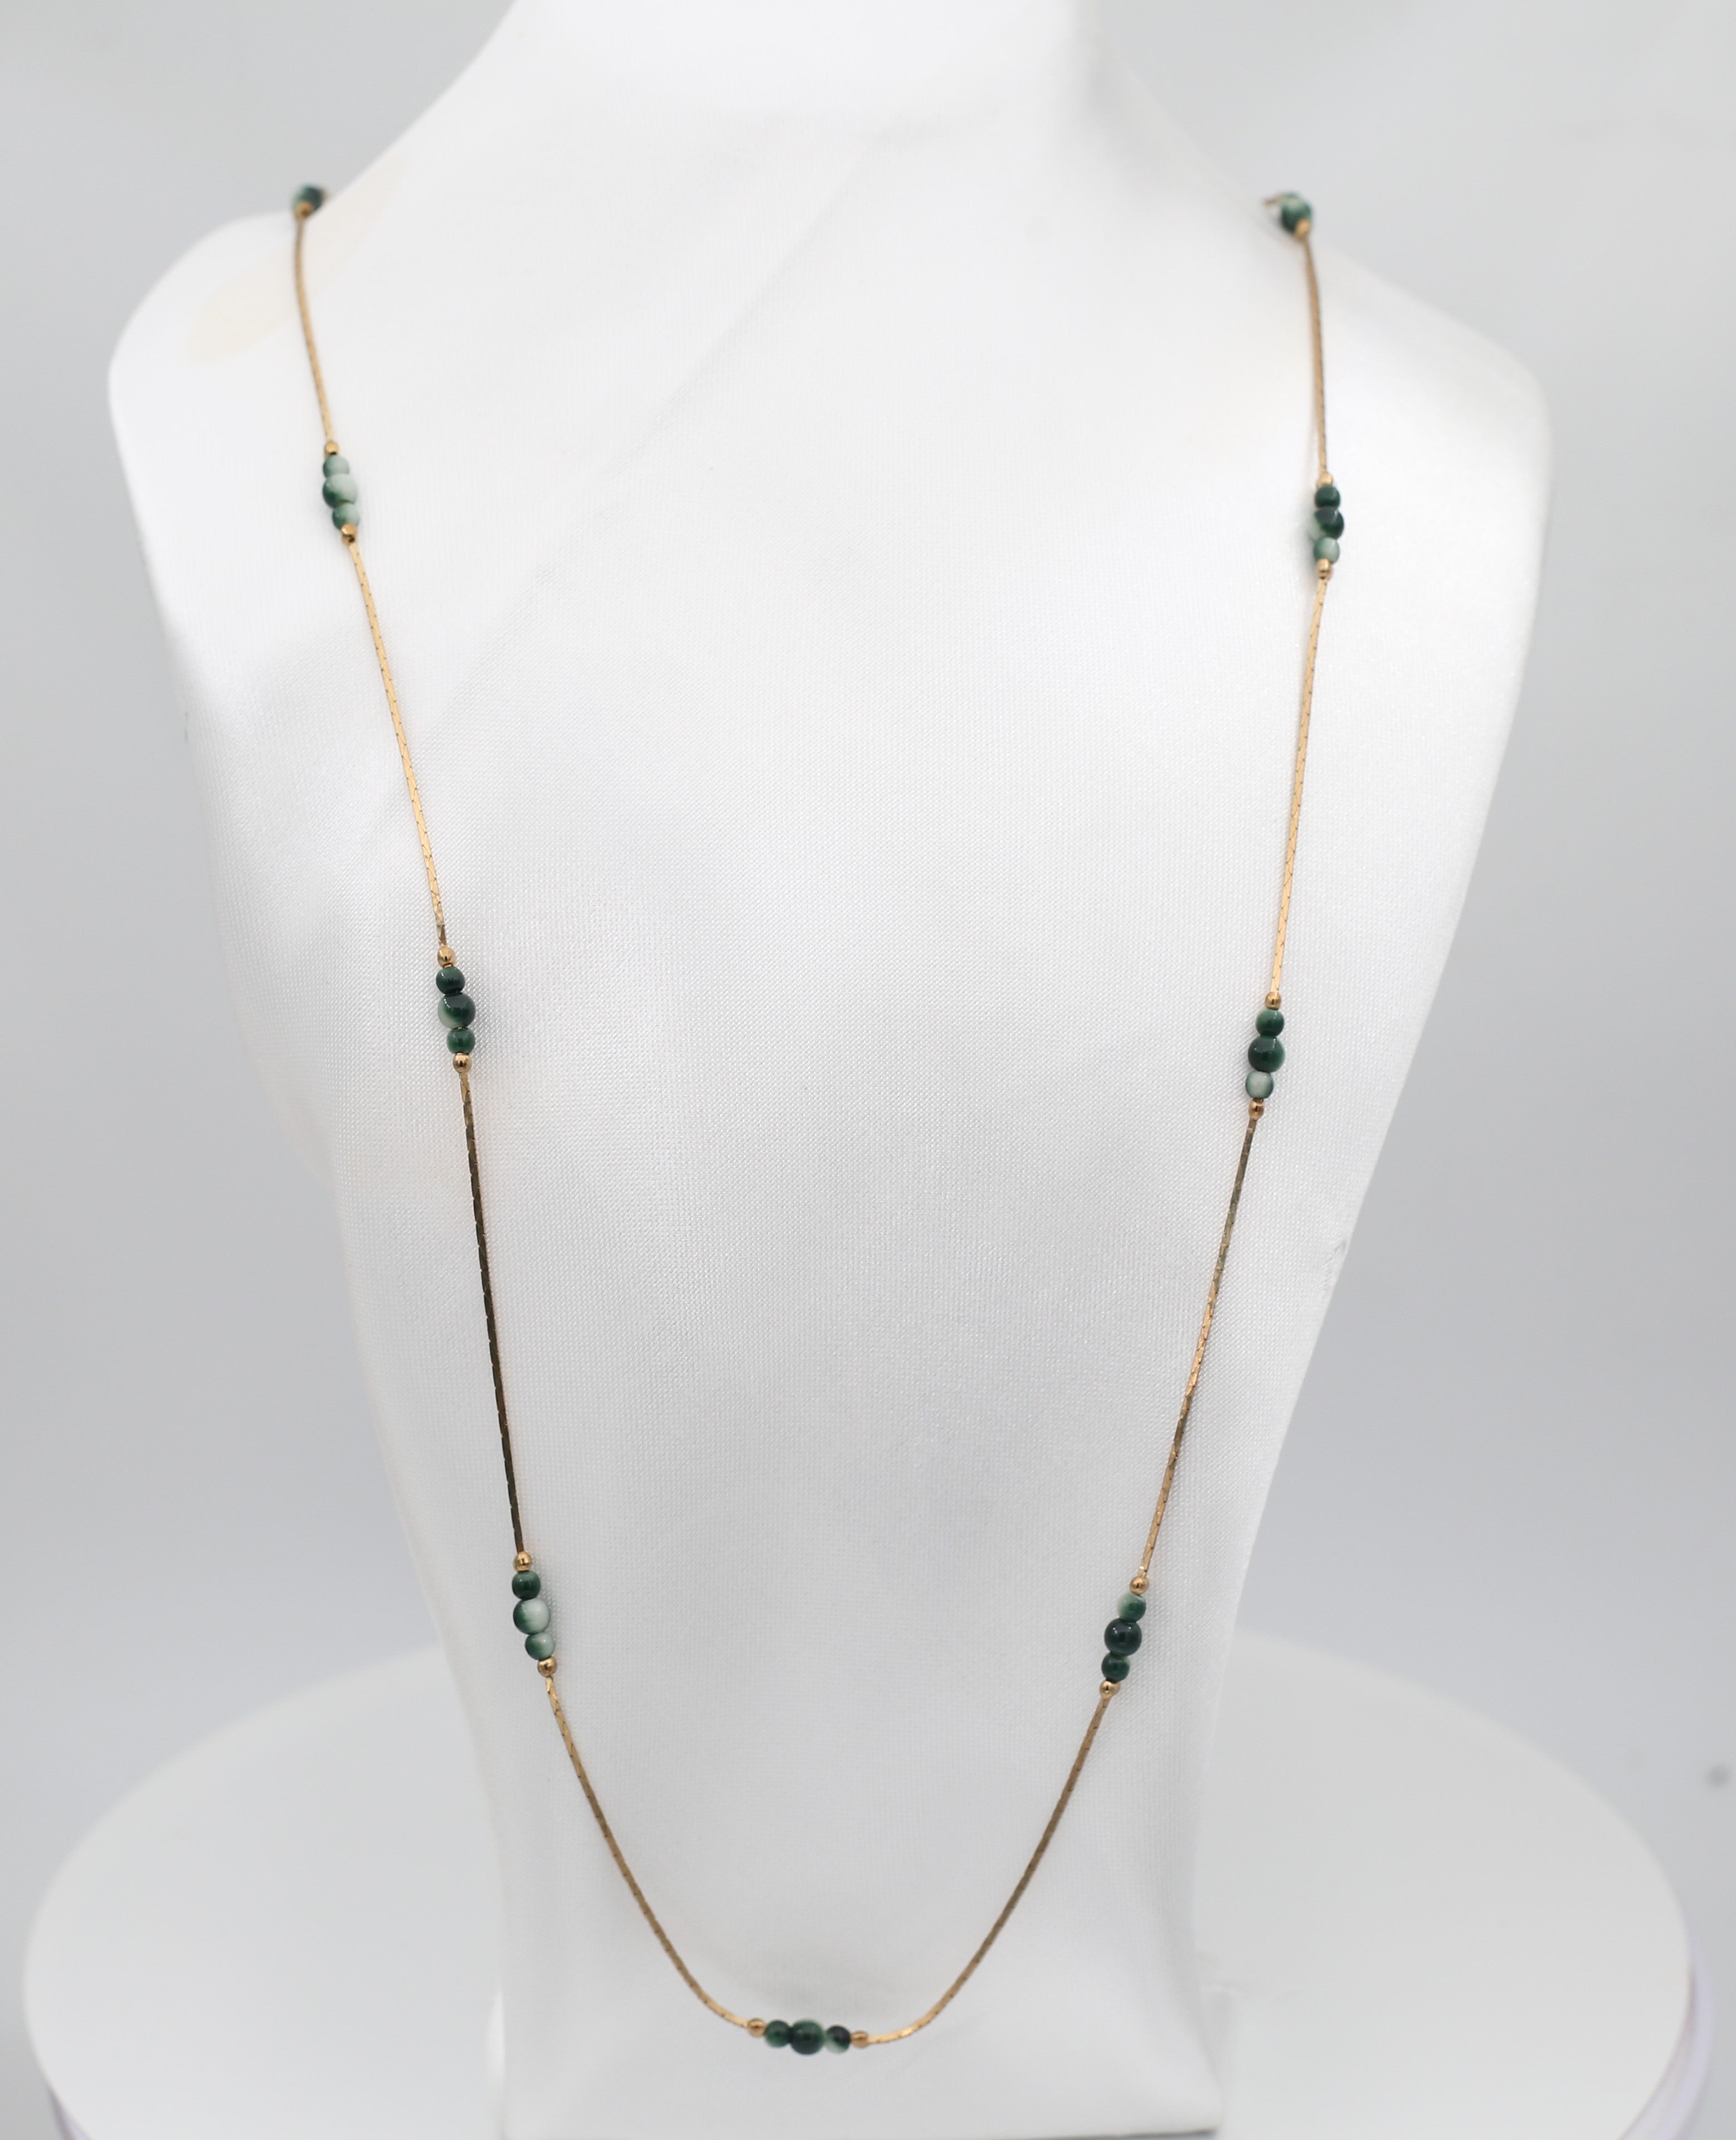 Gold tone Necklace with Green Beads